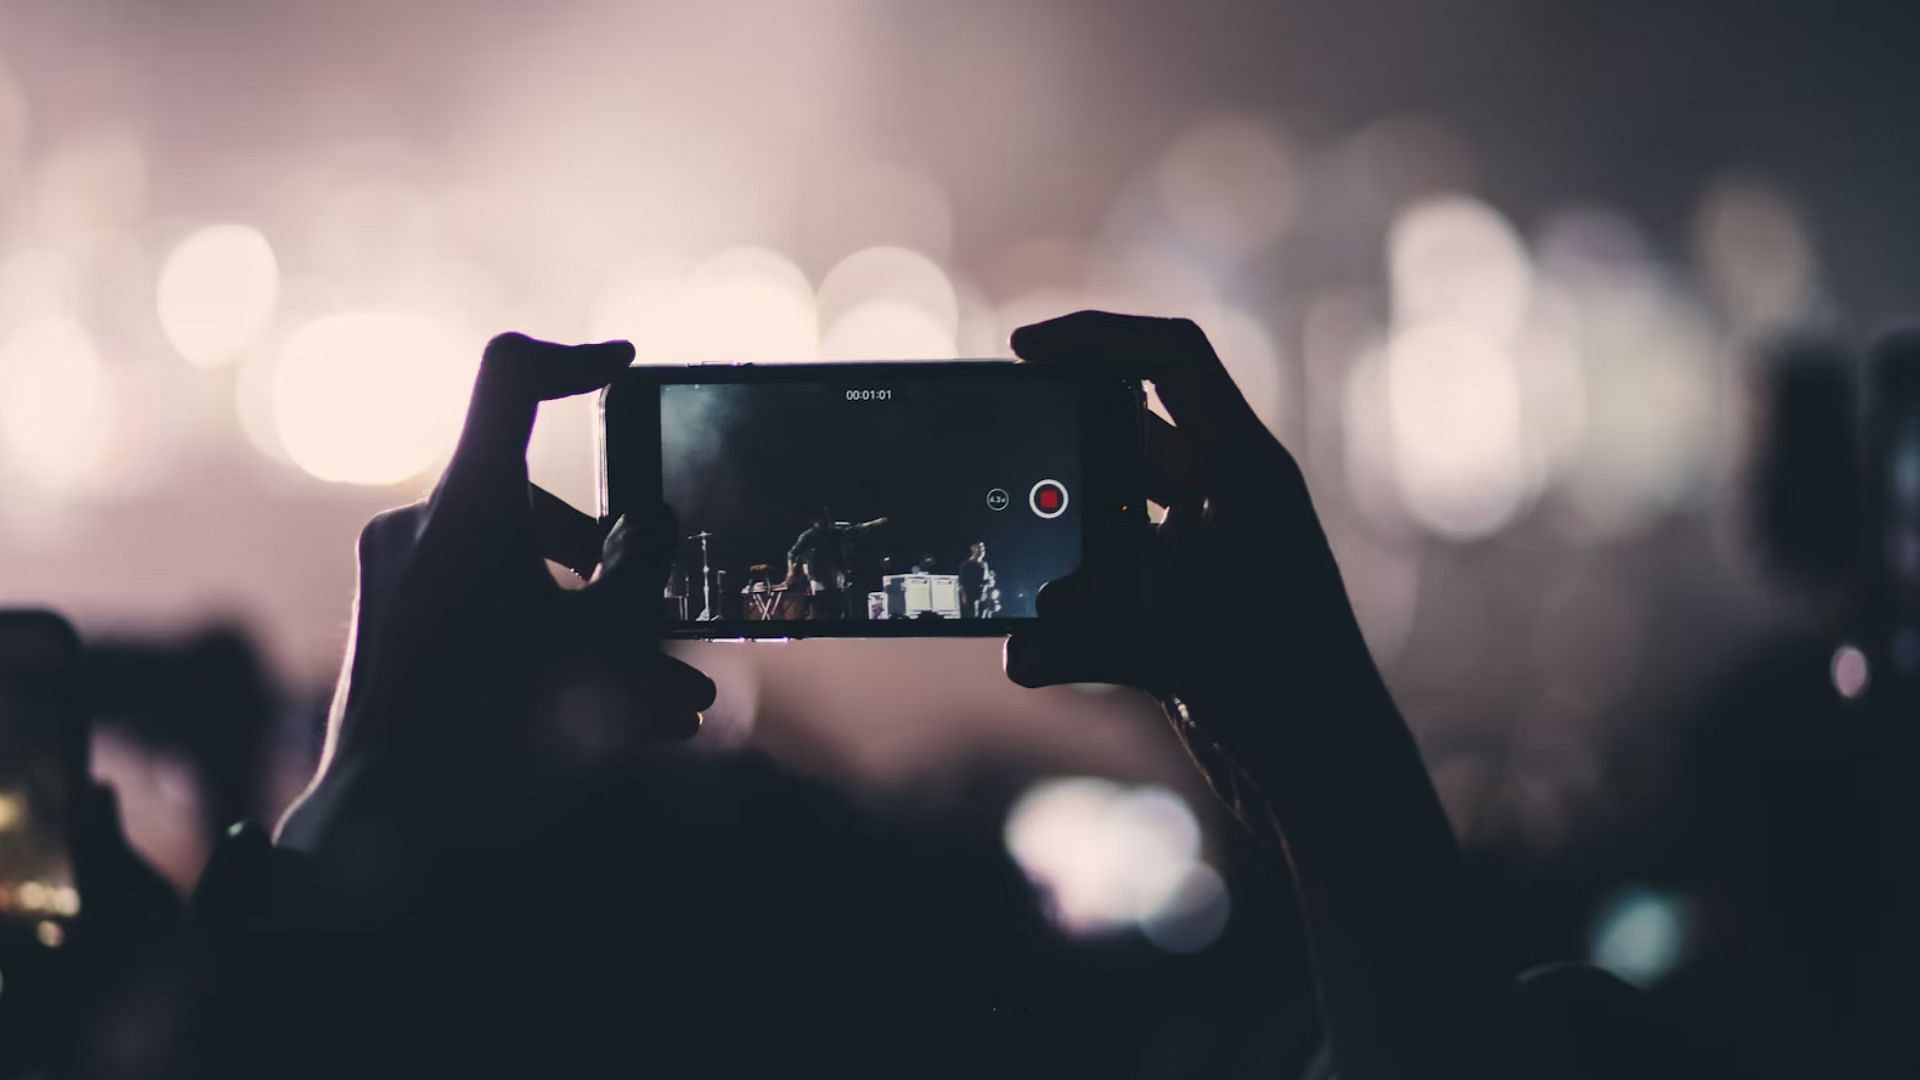 You can&#039;t pause video recording on iPhones (Image via Unsplash/Elliot Teo)